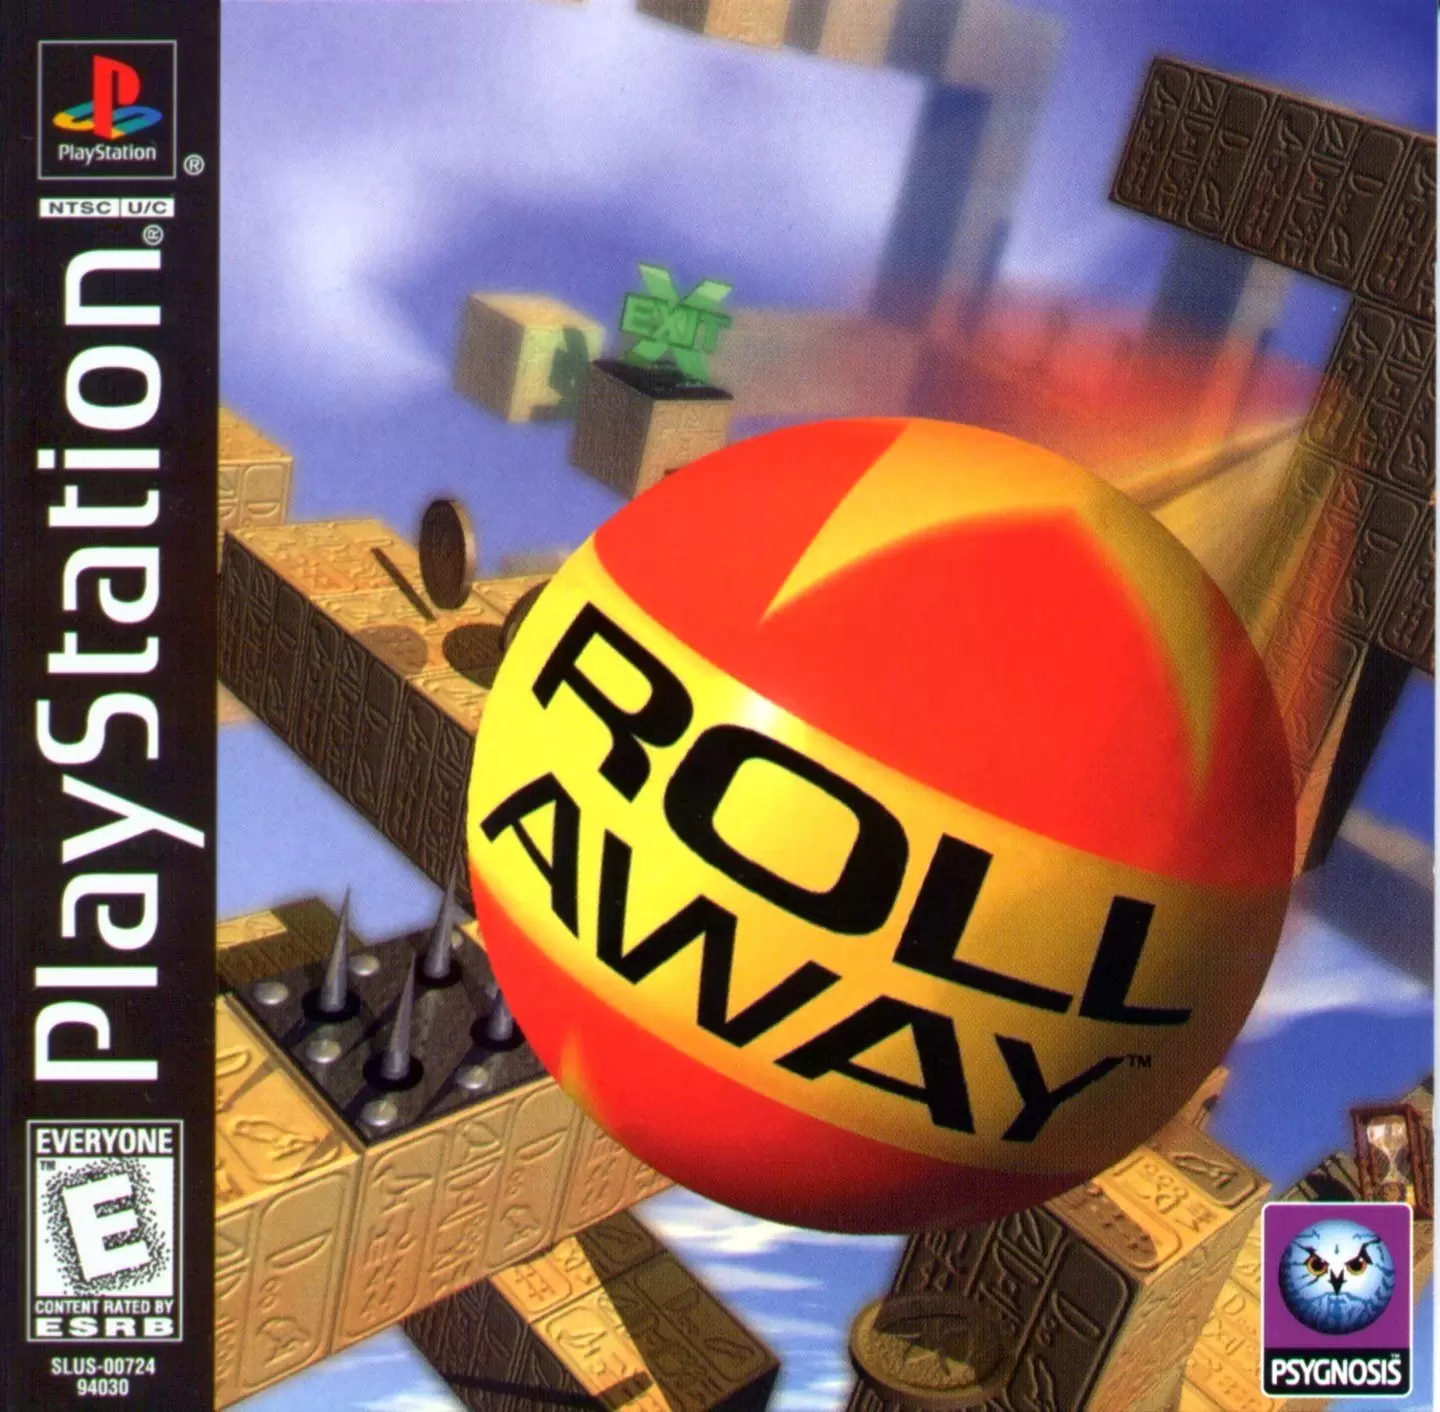 Playstation games - Roll Away